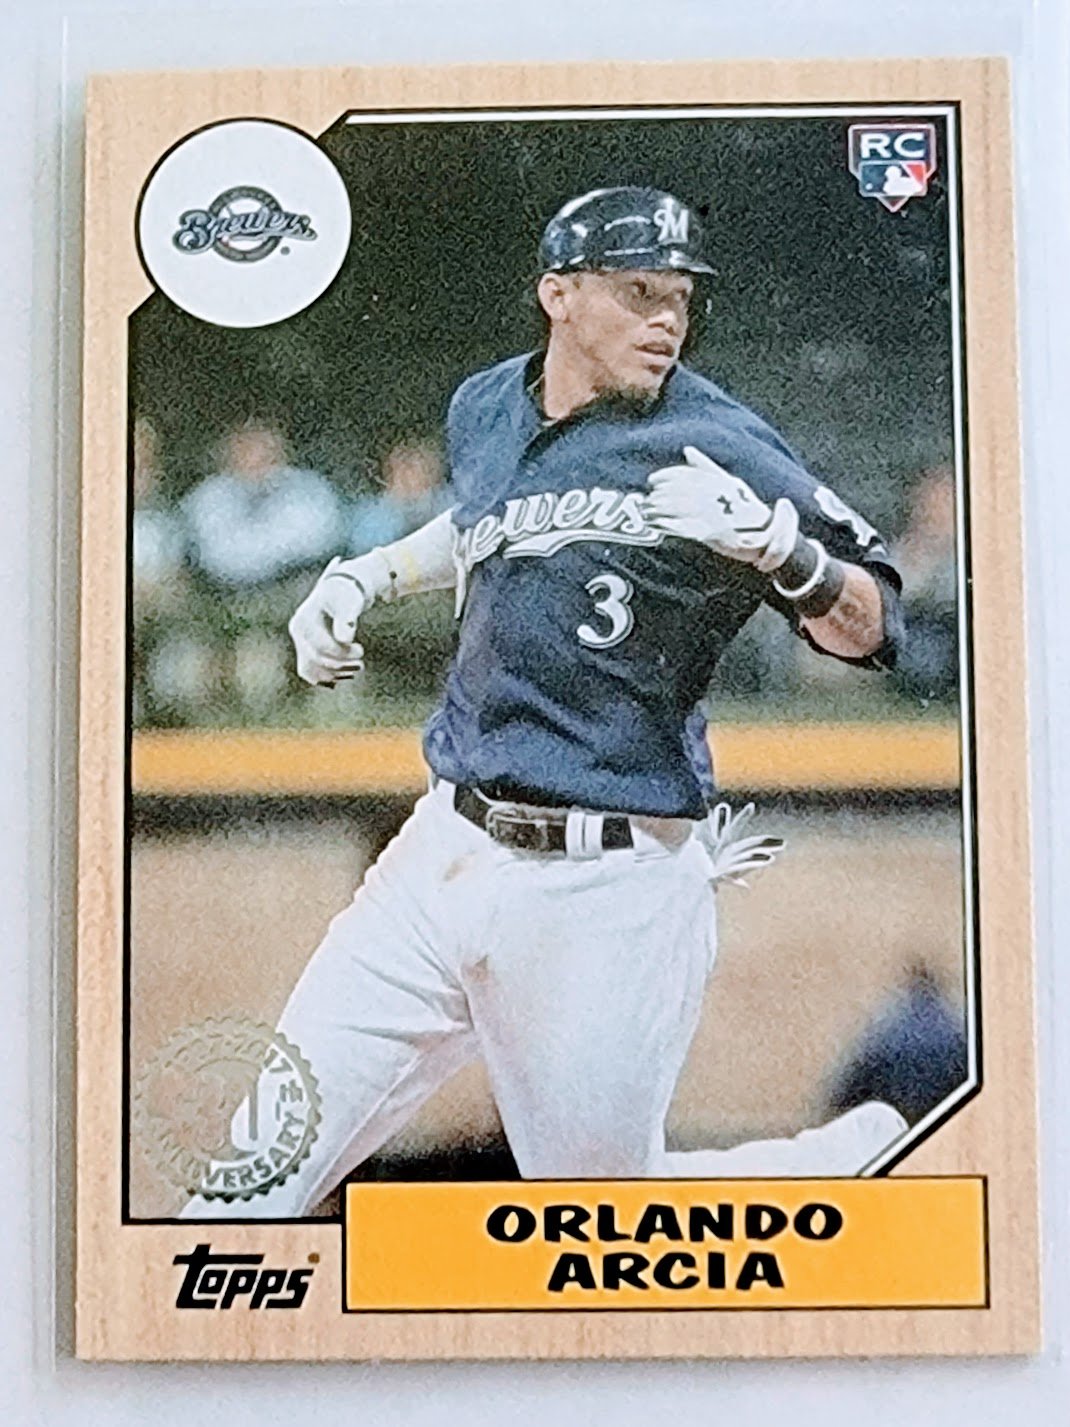 2017 Topps Orlando Arcia 30th Anniversary Rookie Baseball Card TPTV simple Xclusive Collectibles   